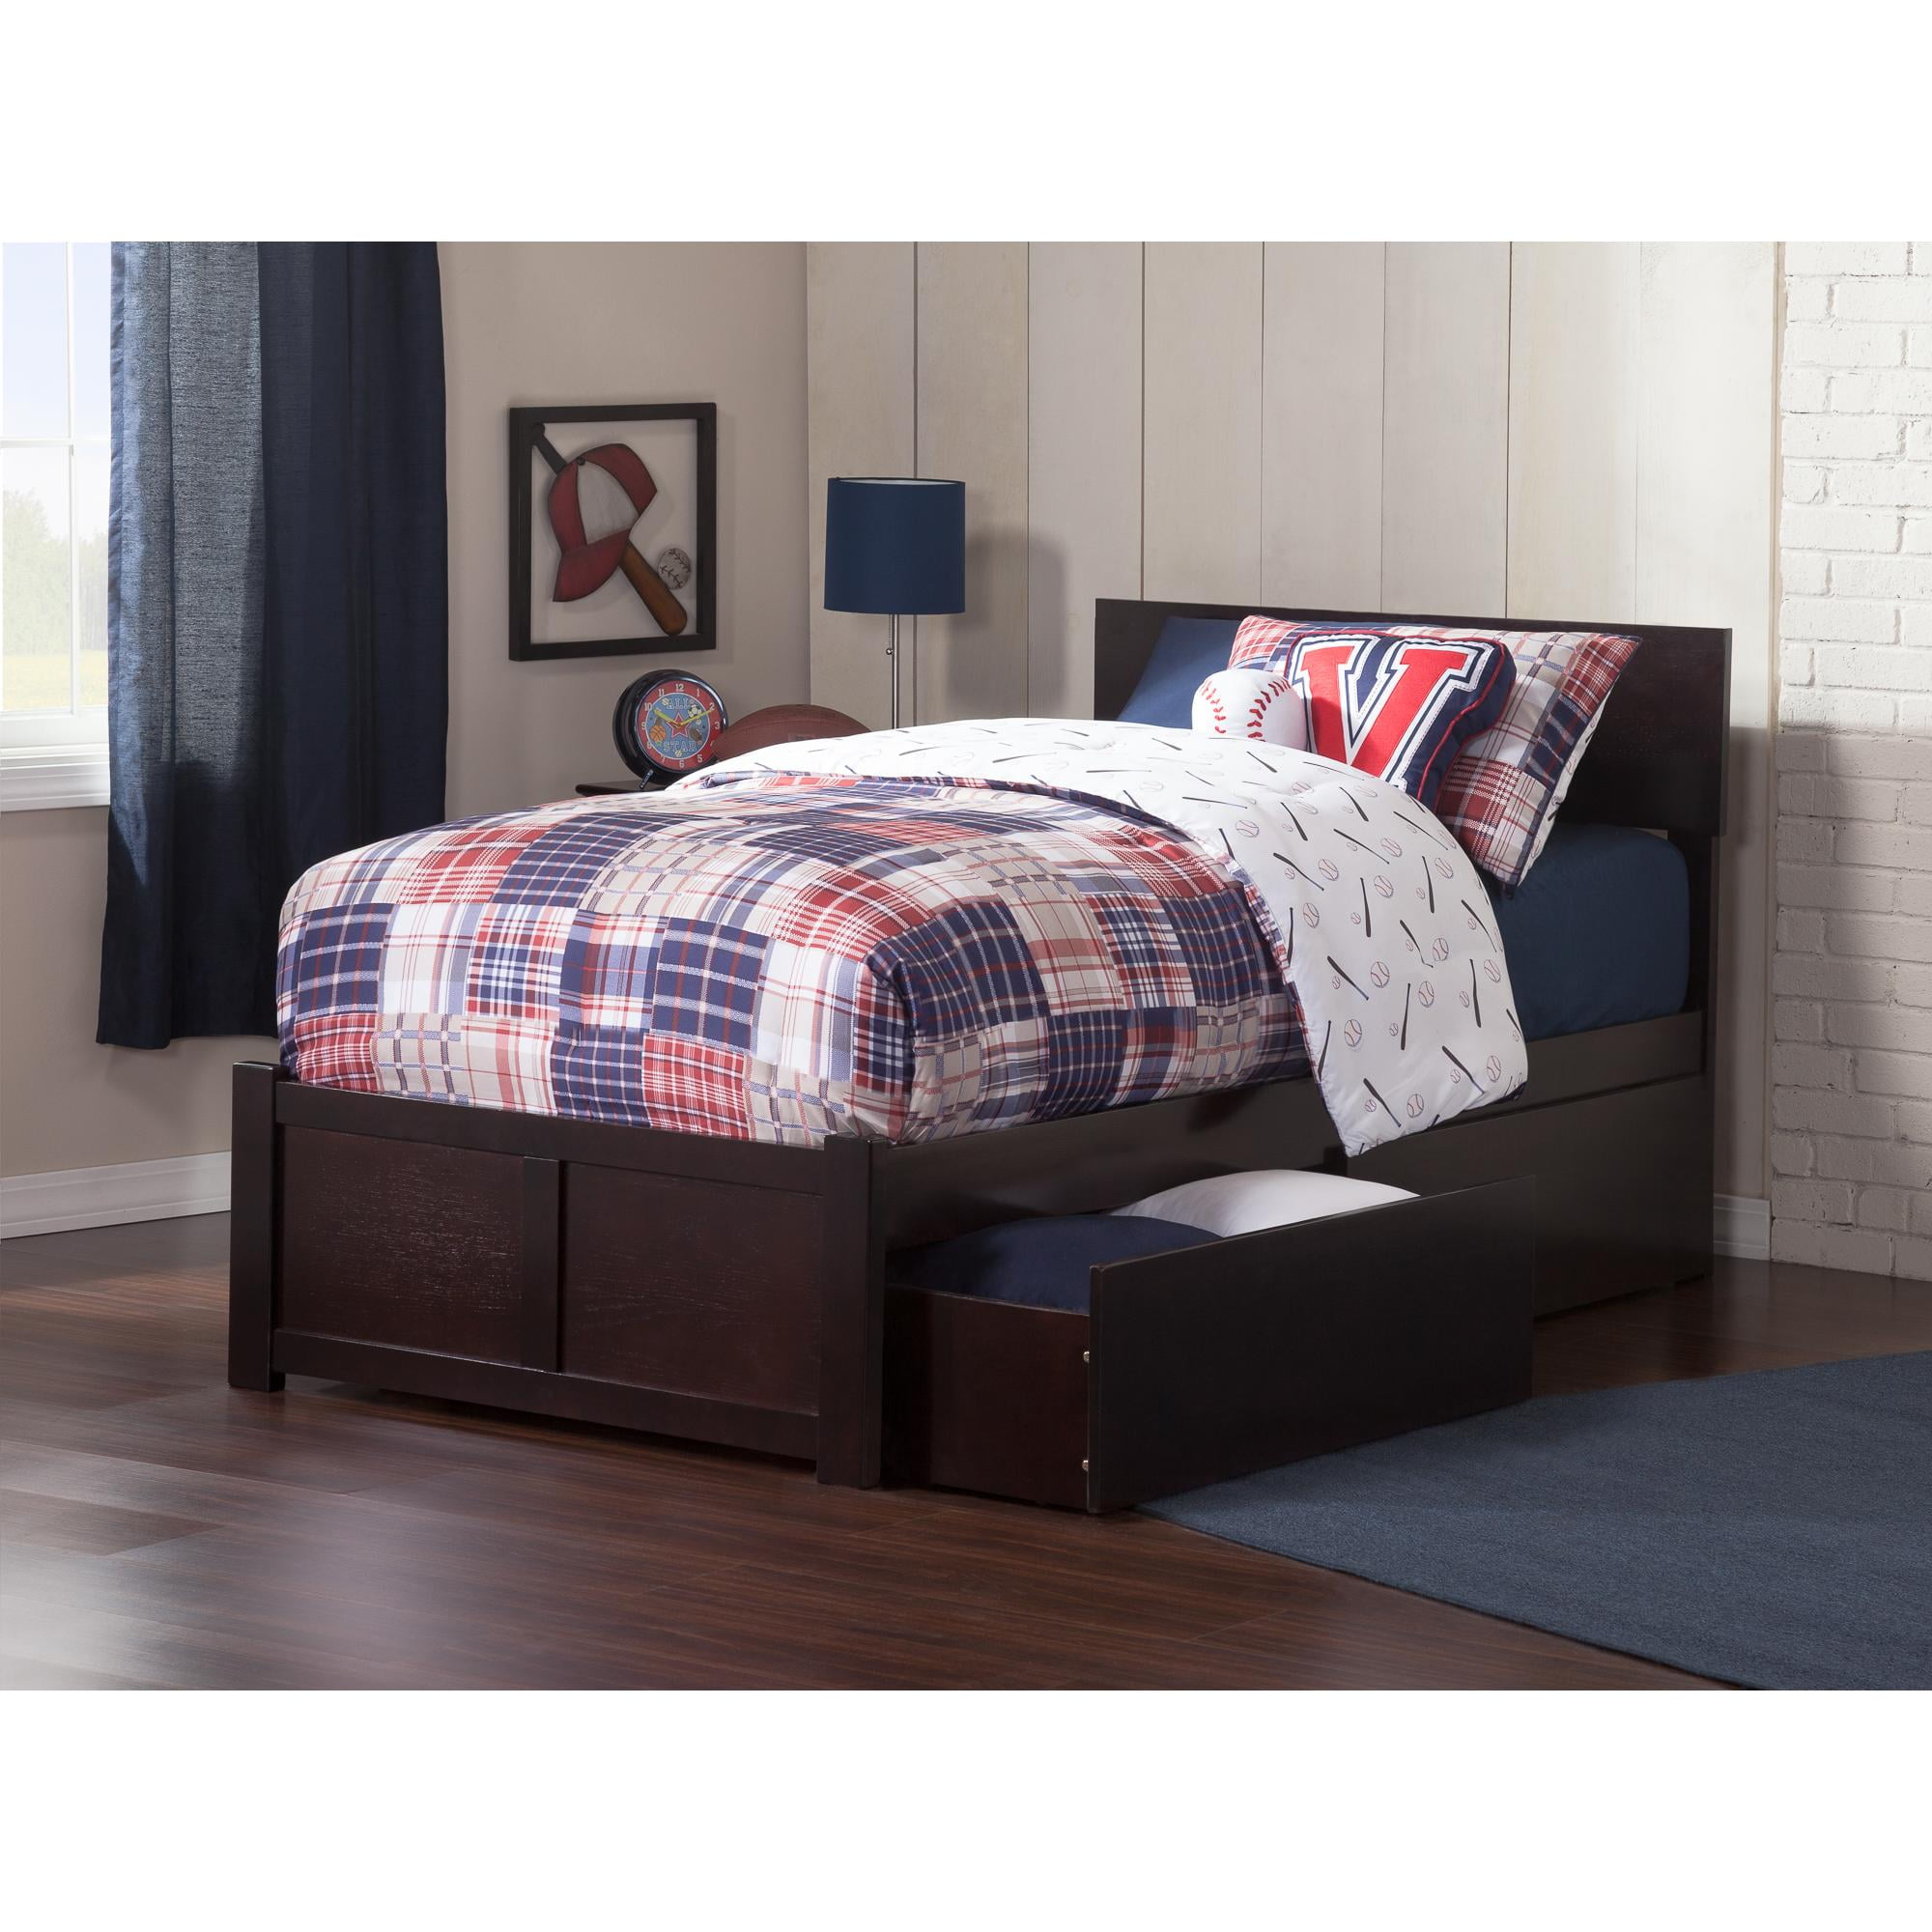 Ar8112111 Orlando Flat Panel Foot Board With Urban Bed Drawers, Espresso - Twin Extra Large